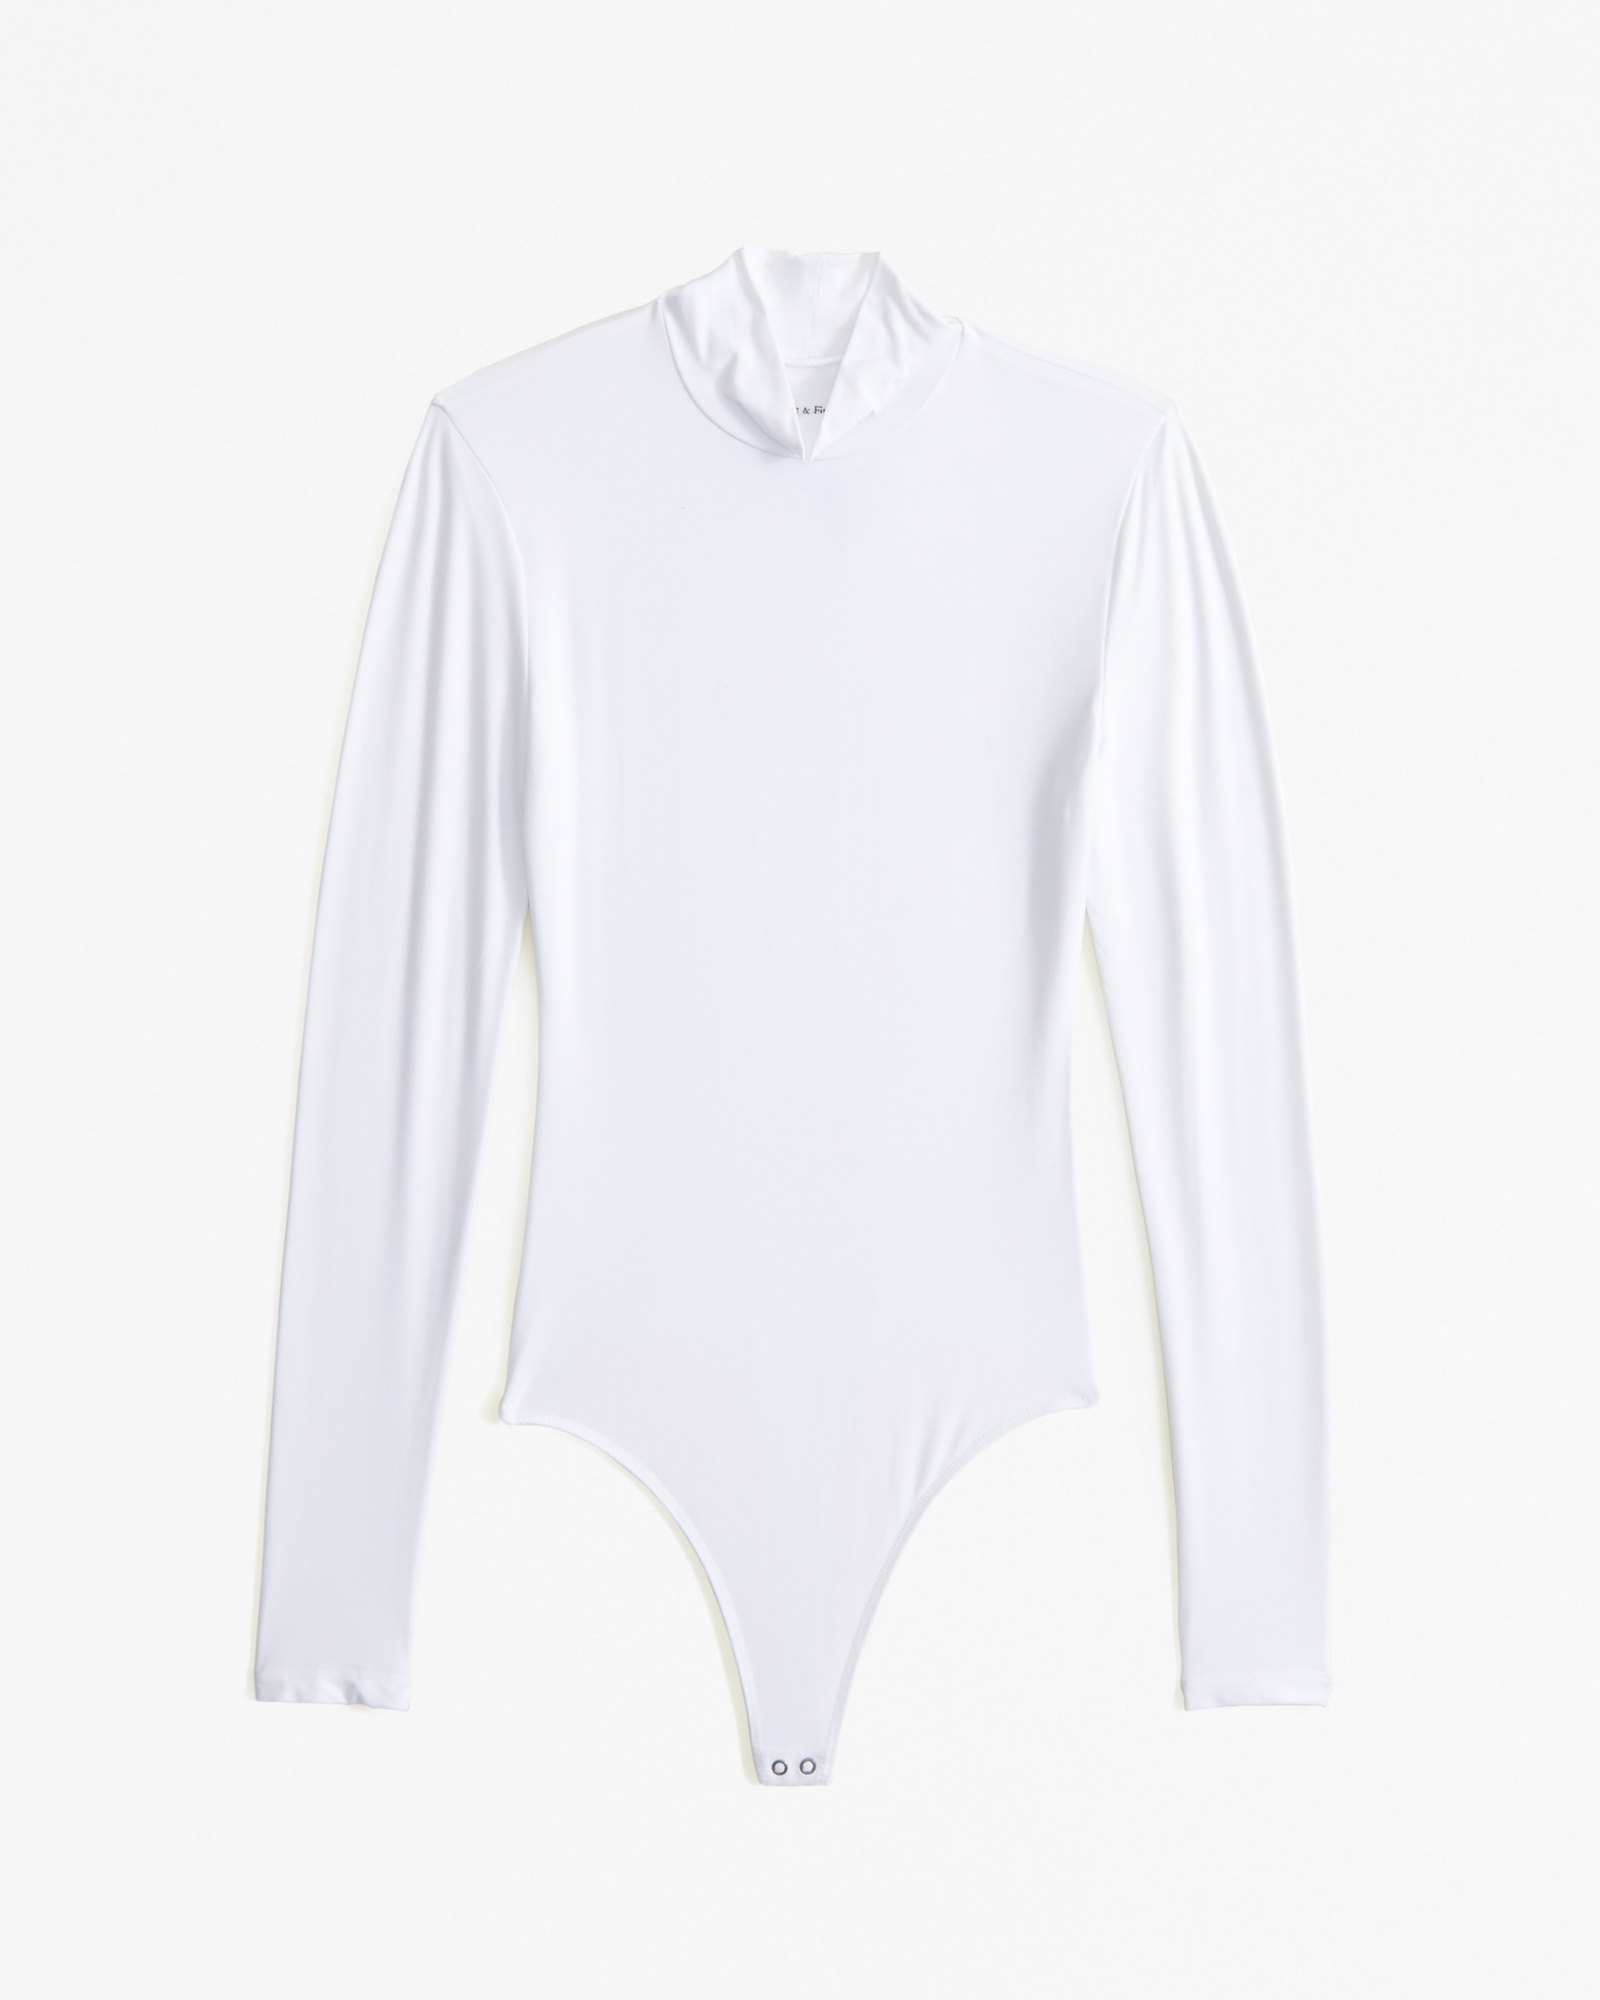 Long Sleeve Bodycon Romper Mock Turtle Neck Top Skinny Leotard Bodysuit  Long Sleeve Bodycon Romper Solid Thong Stretchy Basic Turtleneck XL 230131  From Mu04, $14.09